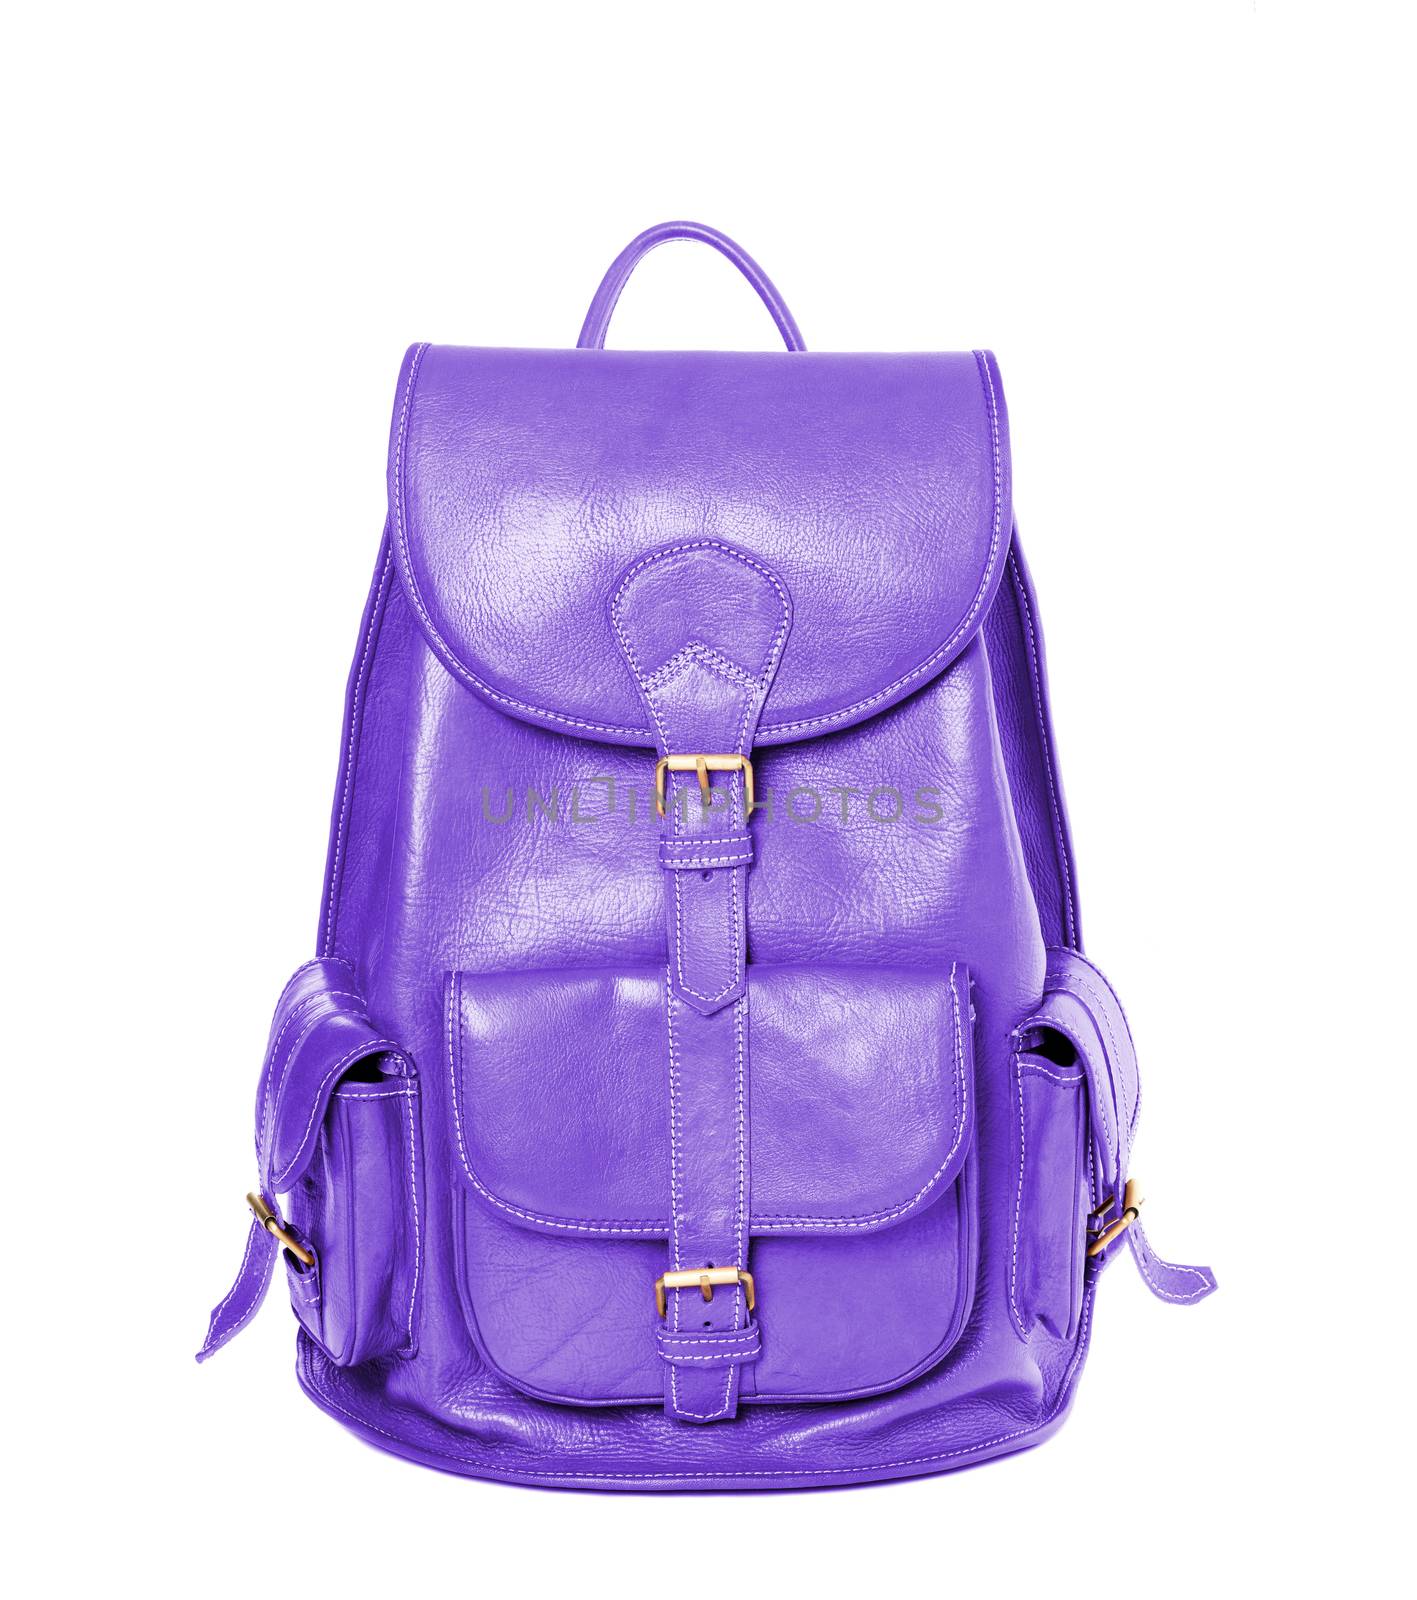 Leather backpack standing isolated purple color by Nanisimova